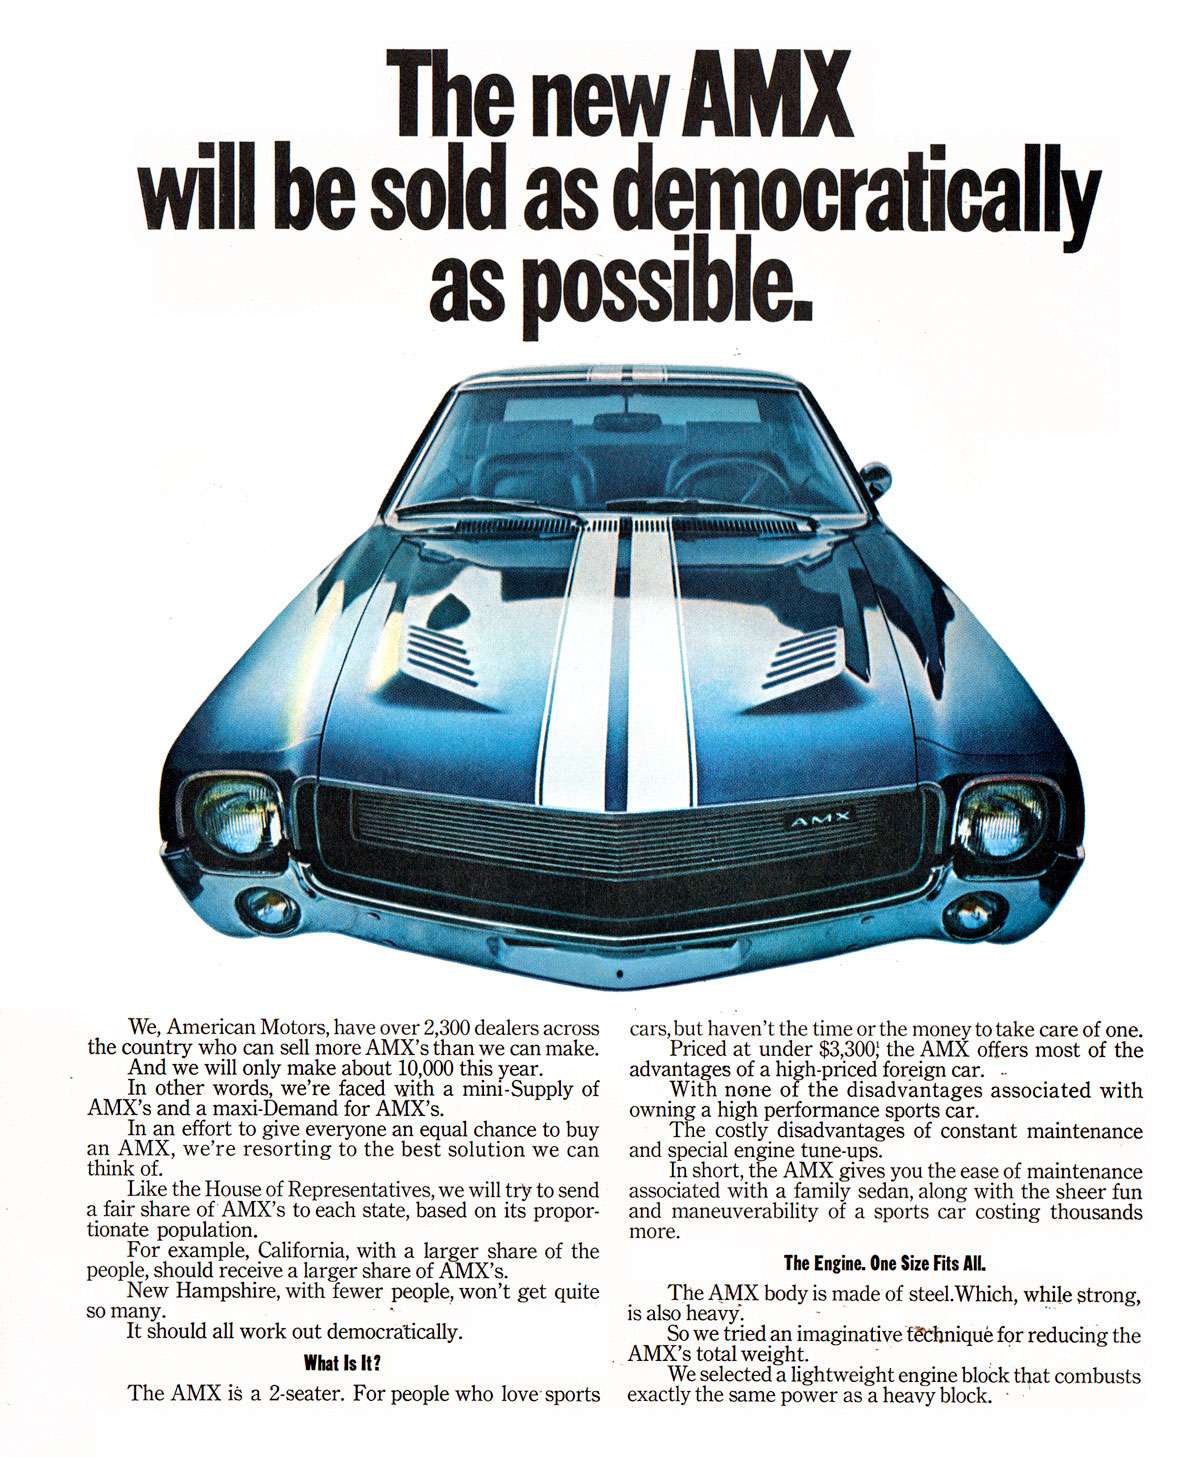 The new AMX will be sold as democratically as possible. 
We, American Motors, have over 2,300 dealers across the country who can sell more AMX's than we can make. And we will only make about 10,000 this year. In other words, we're faced with a mini-Supply of AMX's and a maxi-Demand for AMX's. In an effort to give everyone an equal chance to buy an AMX, we're resorting to the best solution we can think of. Like the House of Representatives, we will try to send a fair share of AMX's to each state, based on its propor-tionate population. For example, California, with a larger share of the people, should receive a larger share of AMX's. New Hampshire, with fewer people, won't get quite so many. It should all work out democratically. What Is It! The AMX is a 2-seater. For people who love sports 
cars, but haven't the time or the money to take care of one. Priced at under $3,300: the AMX offers most of the advantages of a high-priced foreign car. . With none of the disadvantages associated with owning a high performance sports car. The costly disadvantages of constant maintenance and special engine tune-ups. In short, the AMX gives you the ease of maintenance associated with a family sedan, along with the sheer fun and maneuverability of a sports car costing thousands more. 
The Engine. One Size Fits AIL The AMX body is made of steel.Which, while strong, is also heavy. So we tried an imaginative tethnique for reducing the AMX's total weight. We selected a lightweight engine block that combusts exactly the same power as a heavy block.